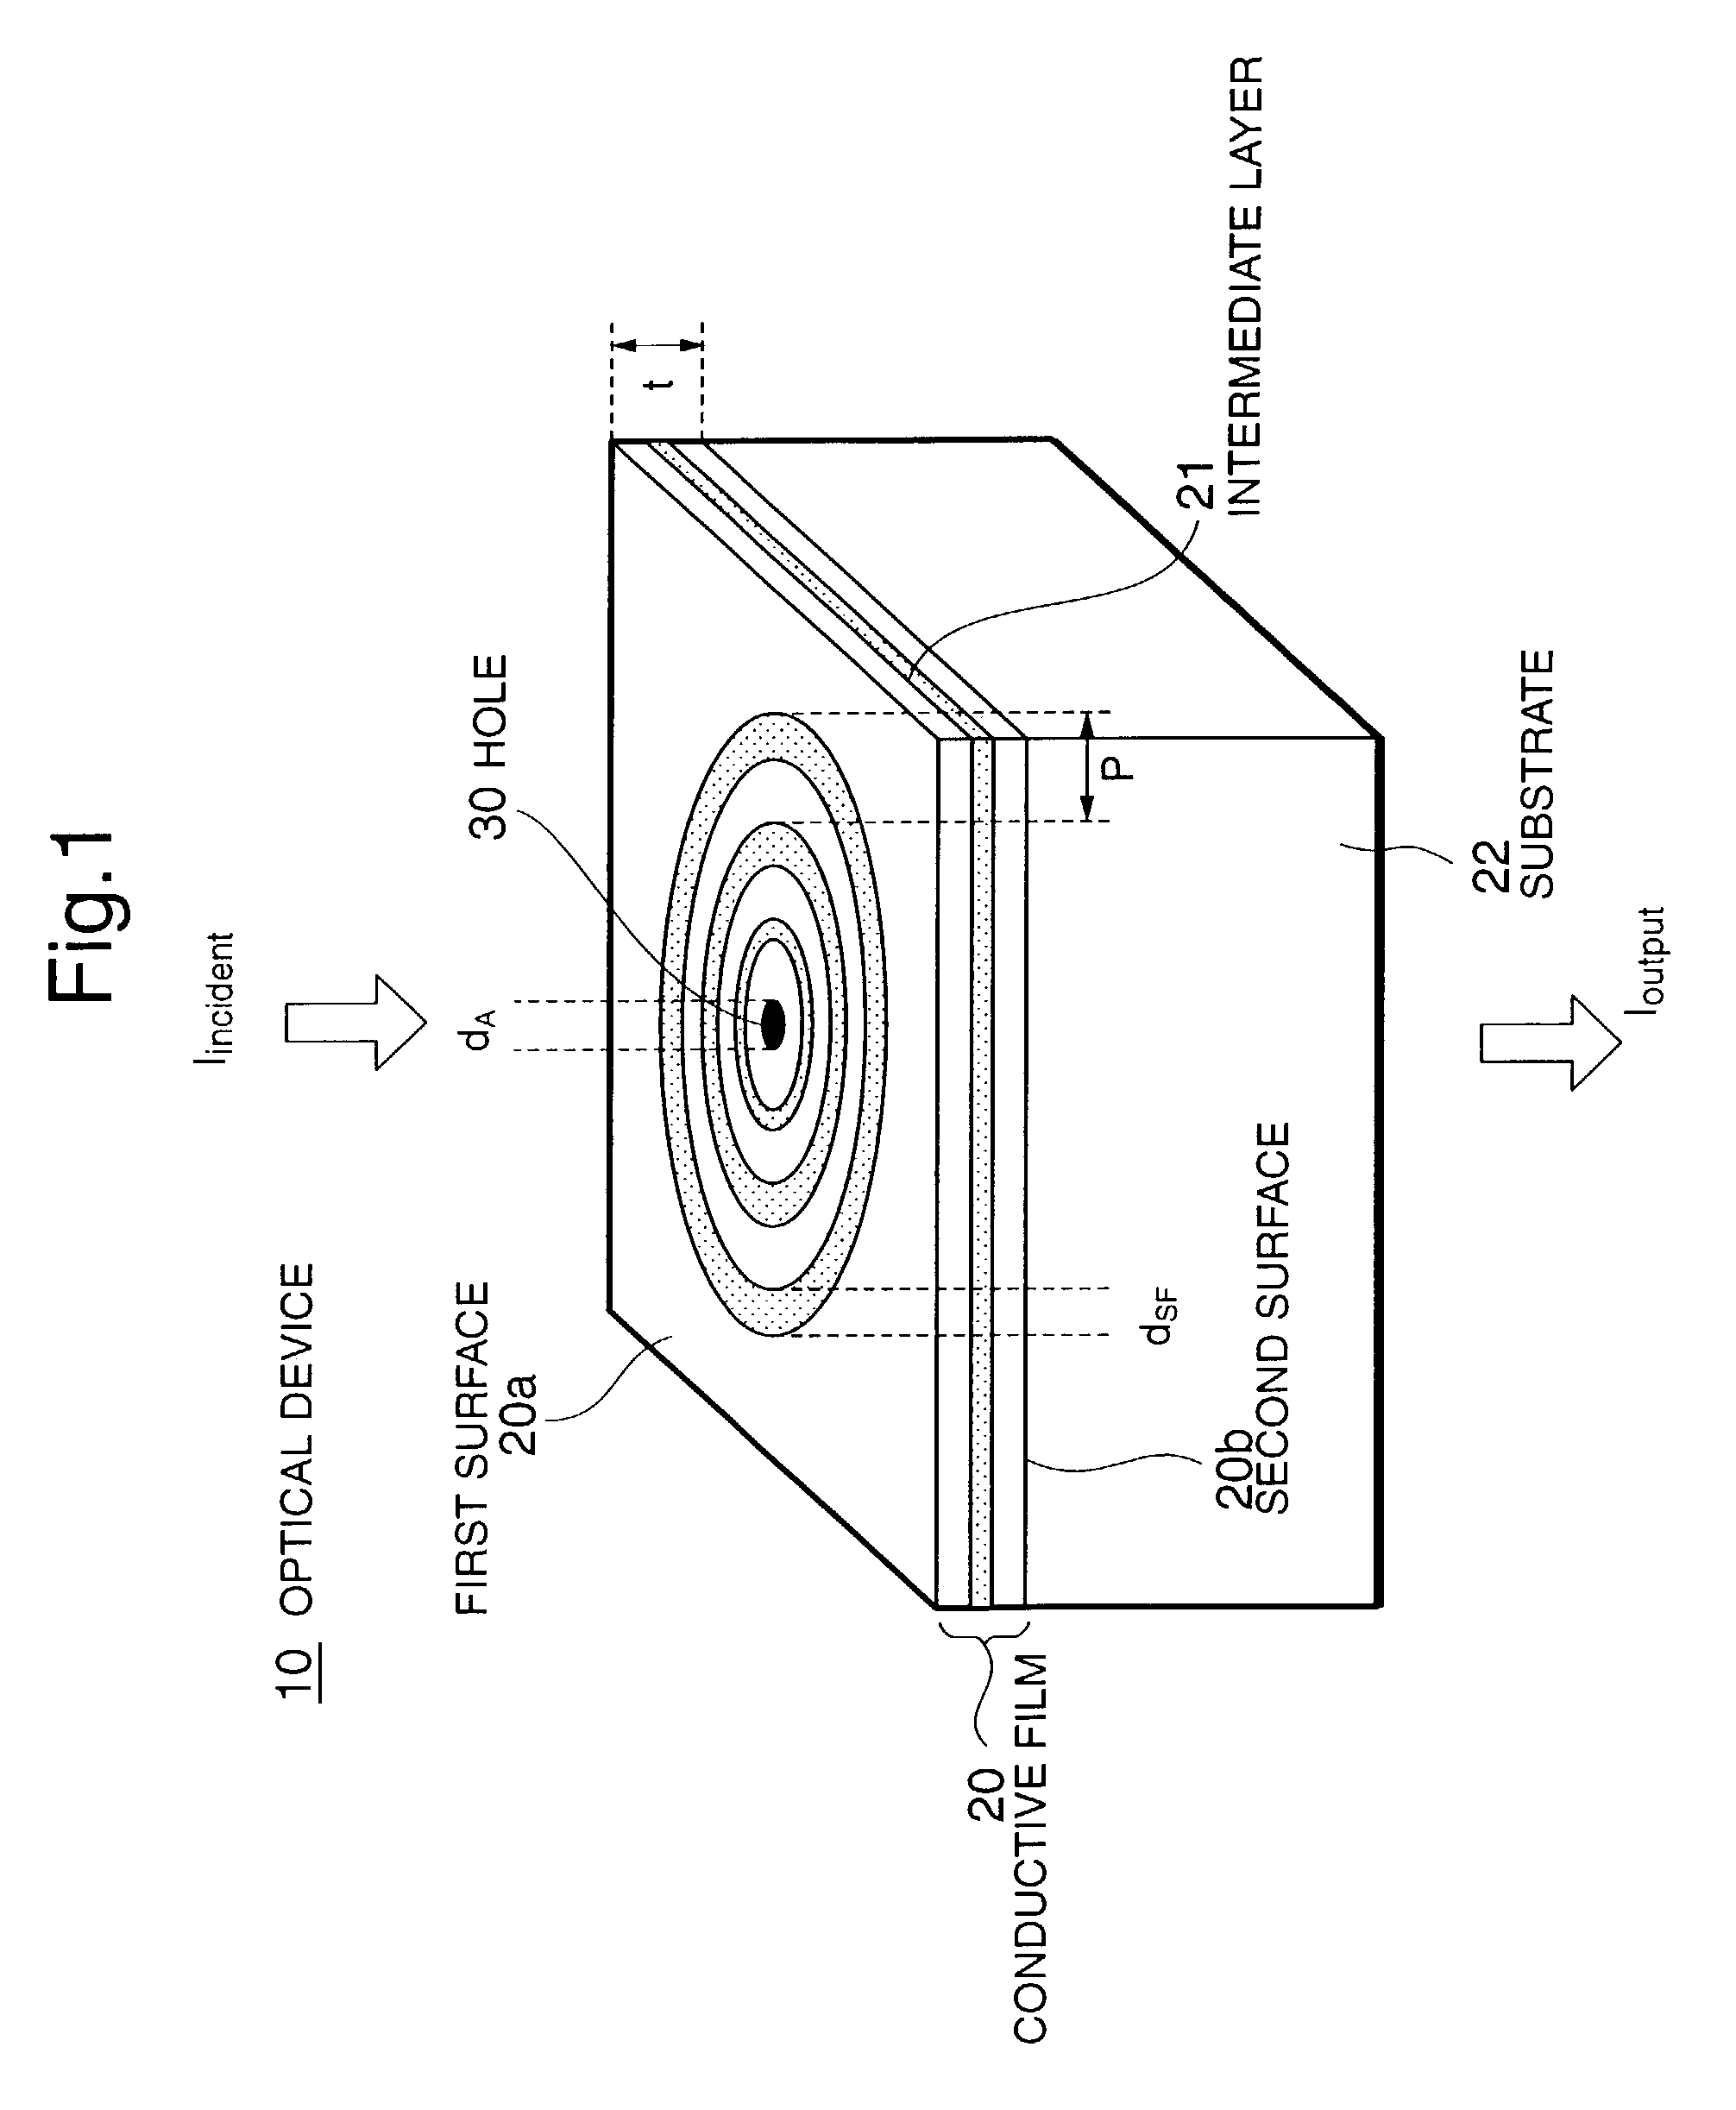 Optical head and optical device for enhancing the intensity of a transmitted light